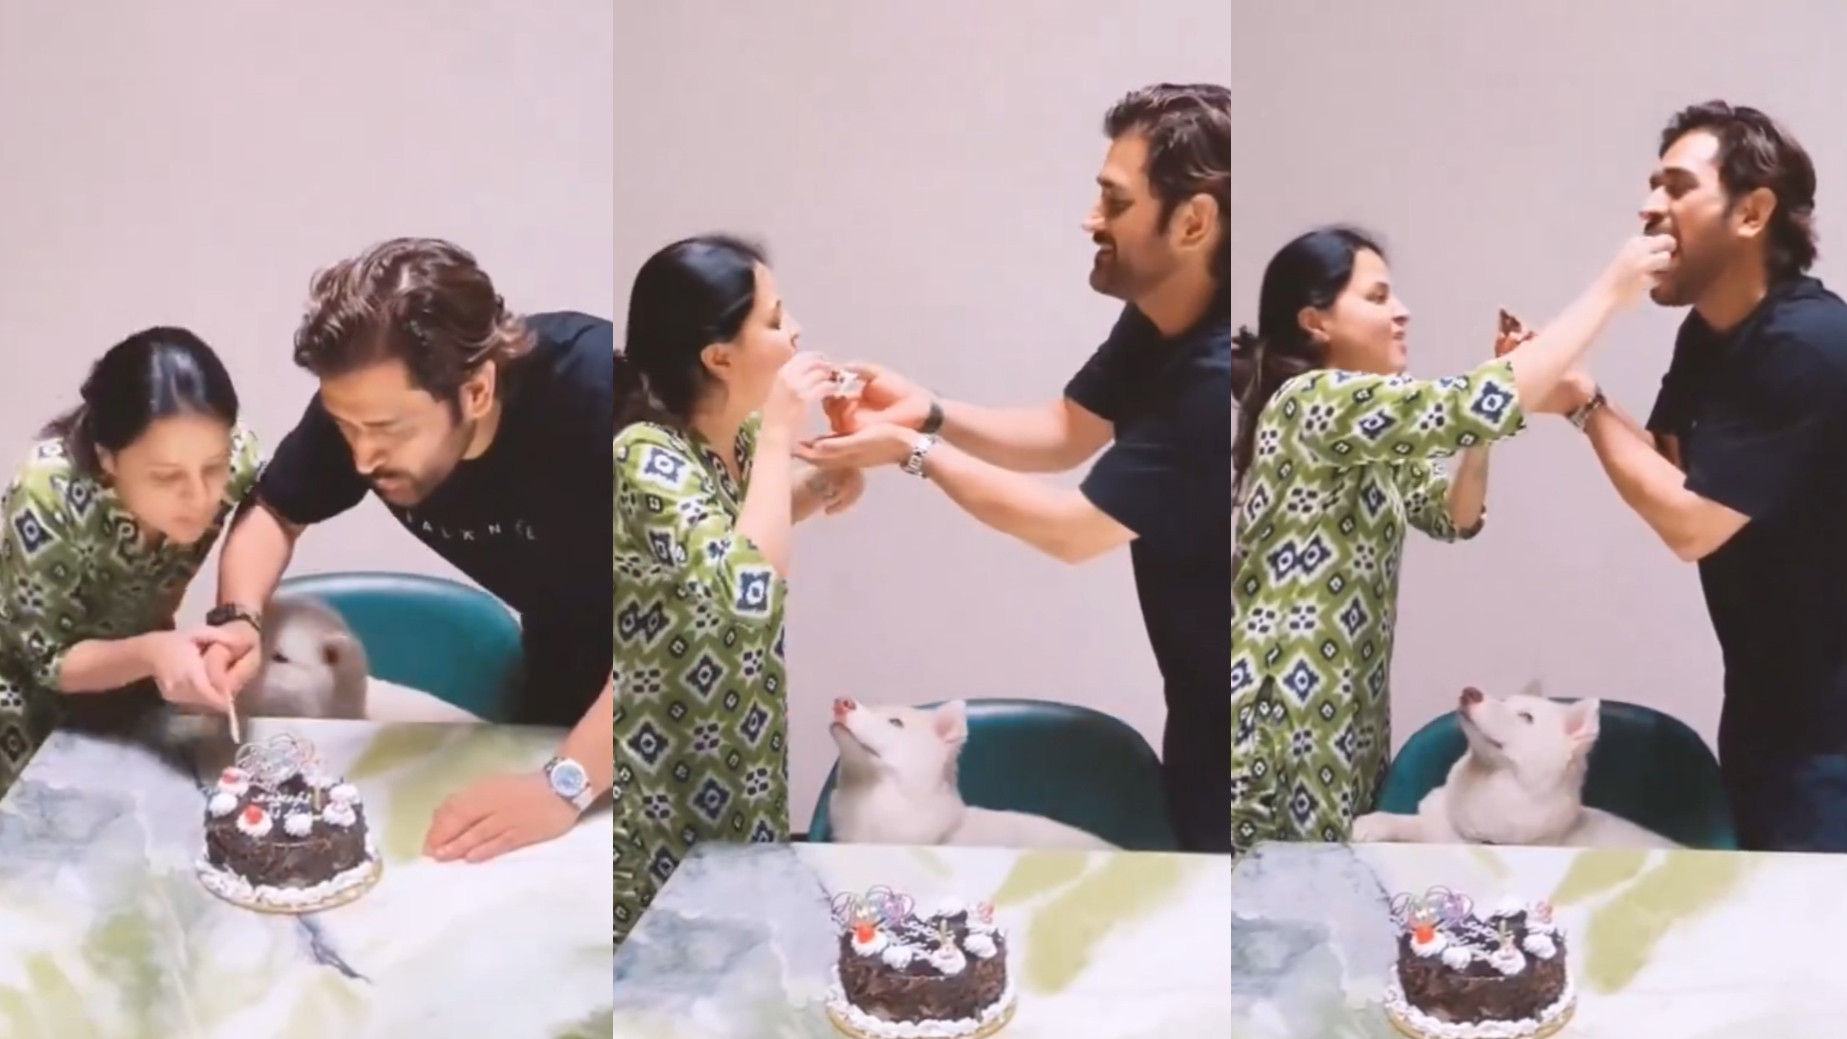 WATCH- MS Dhoni and Sakshi celebrate 15 years of togetherness by cutting a cake